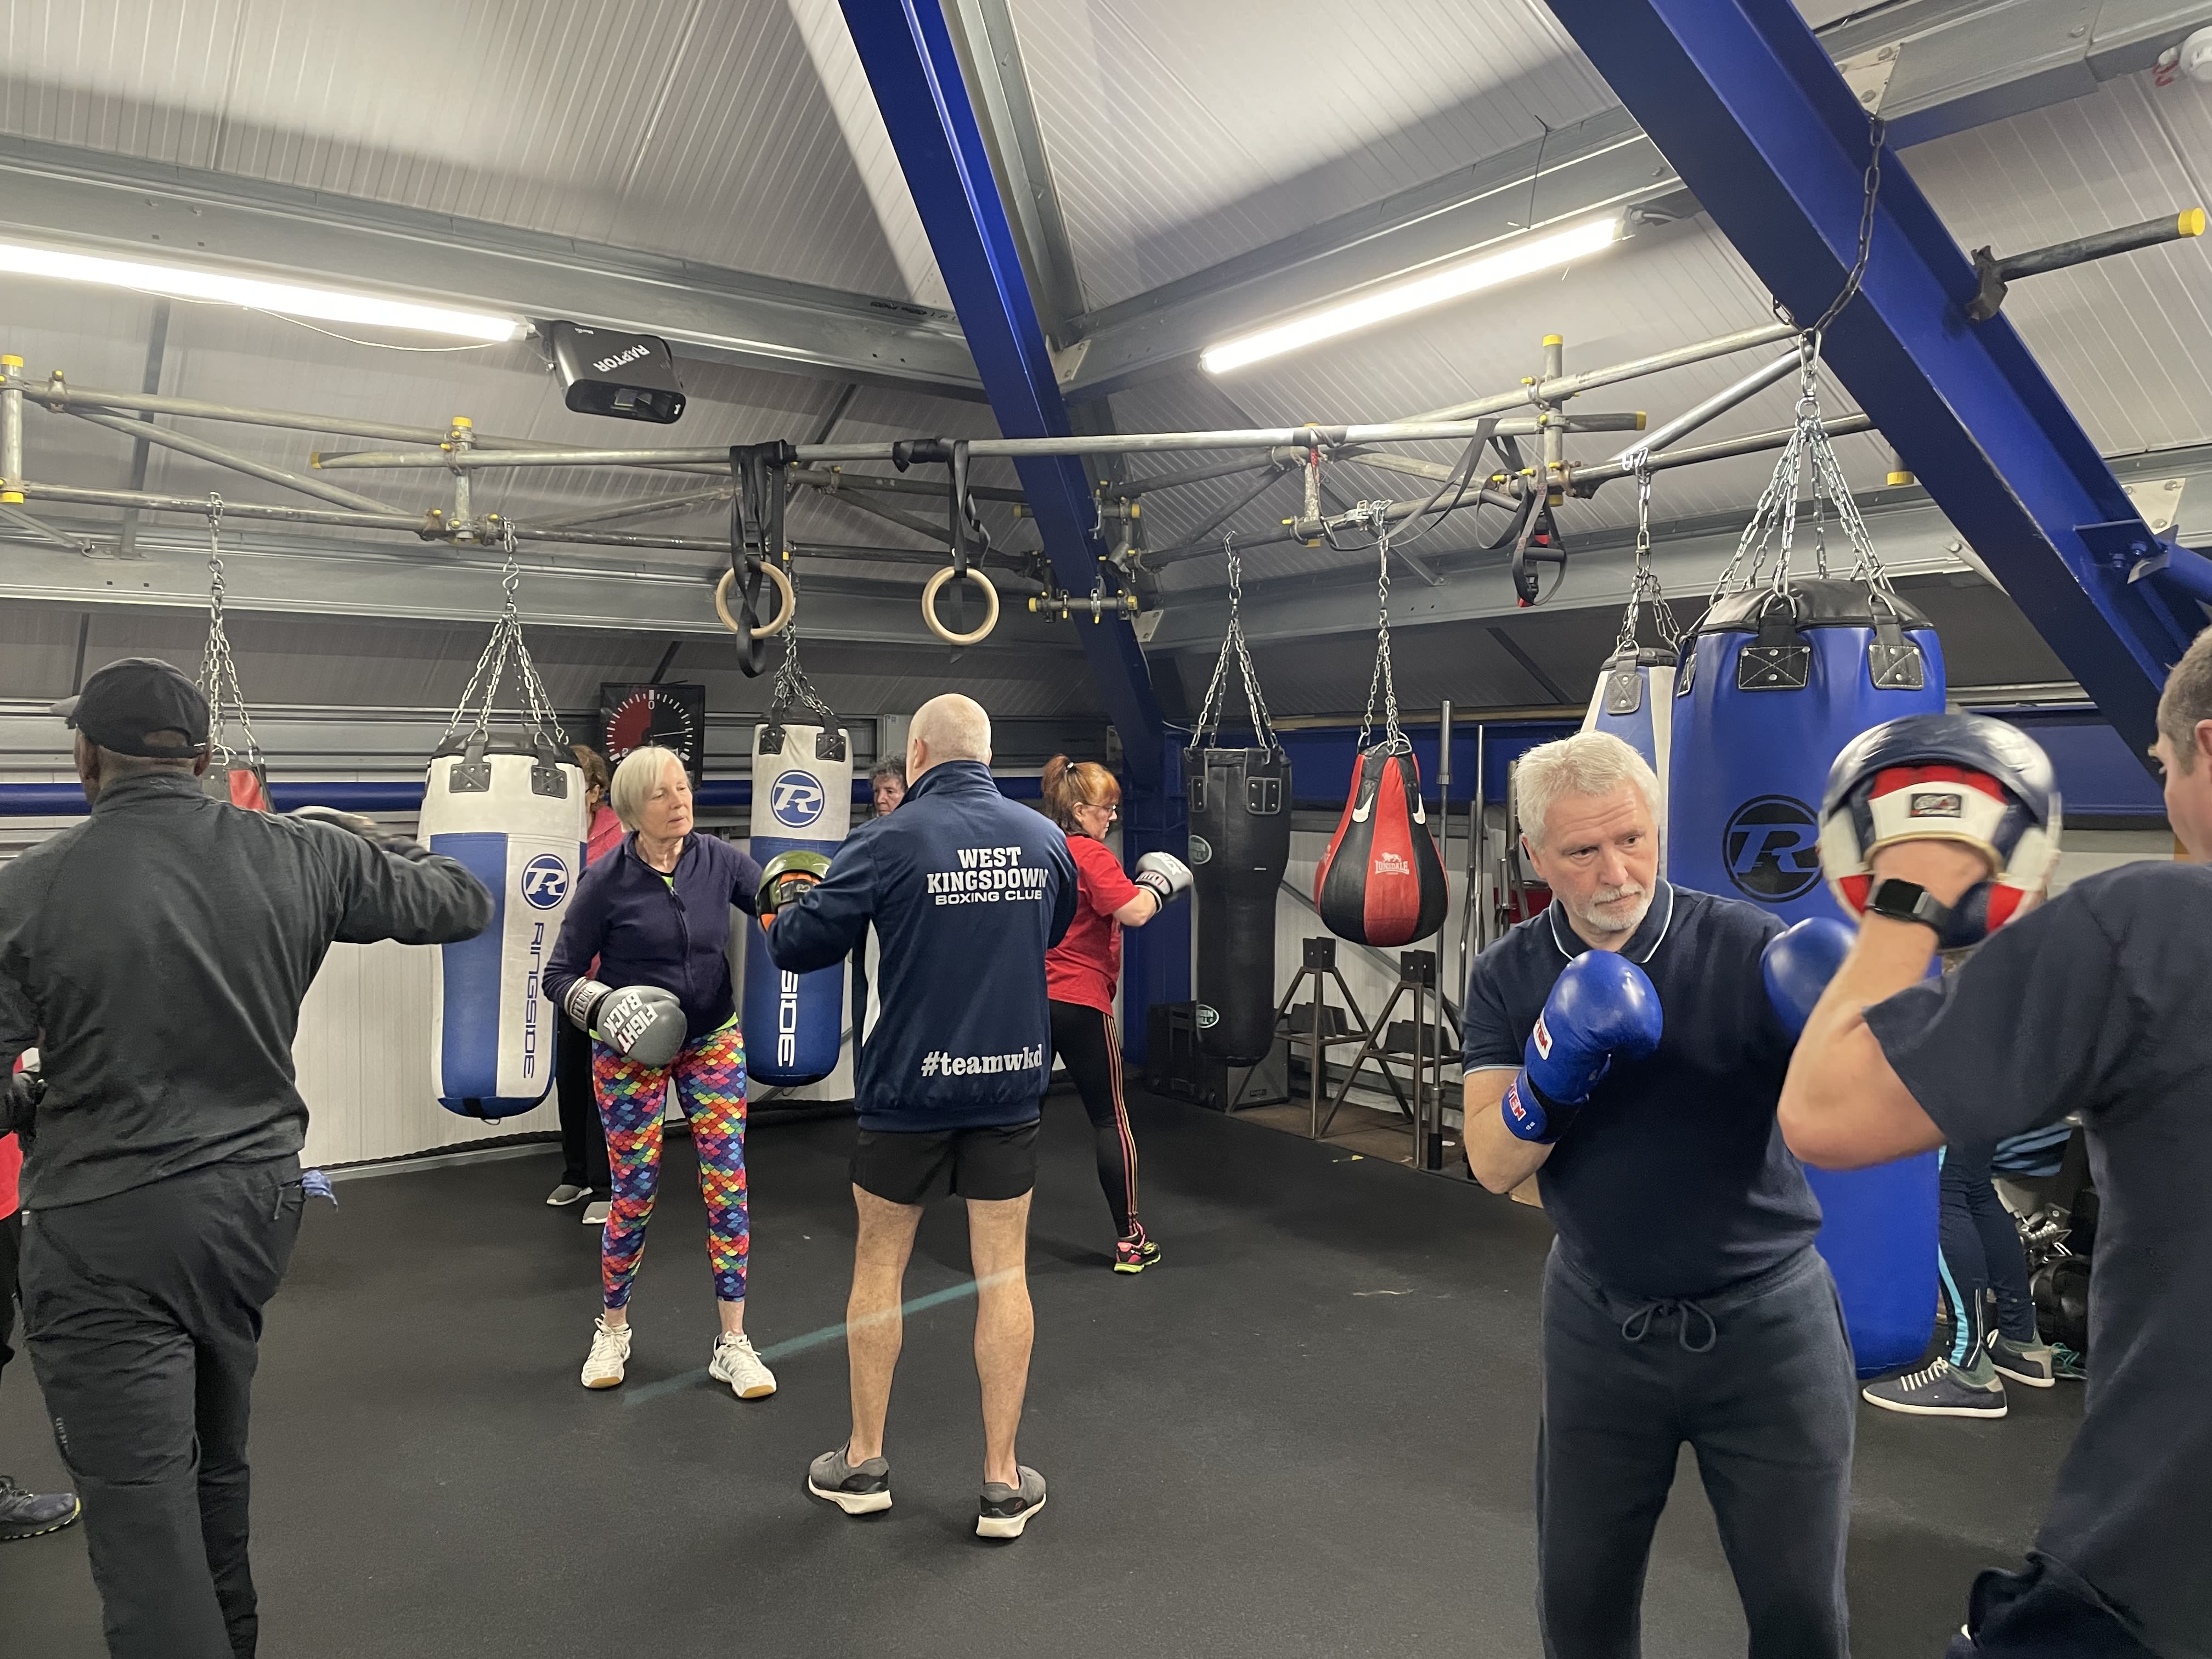 Coaches engage in individual pad work with different attendees living with Parkinson's, behind them, other goers practice on the punch bags.